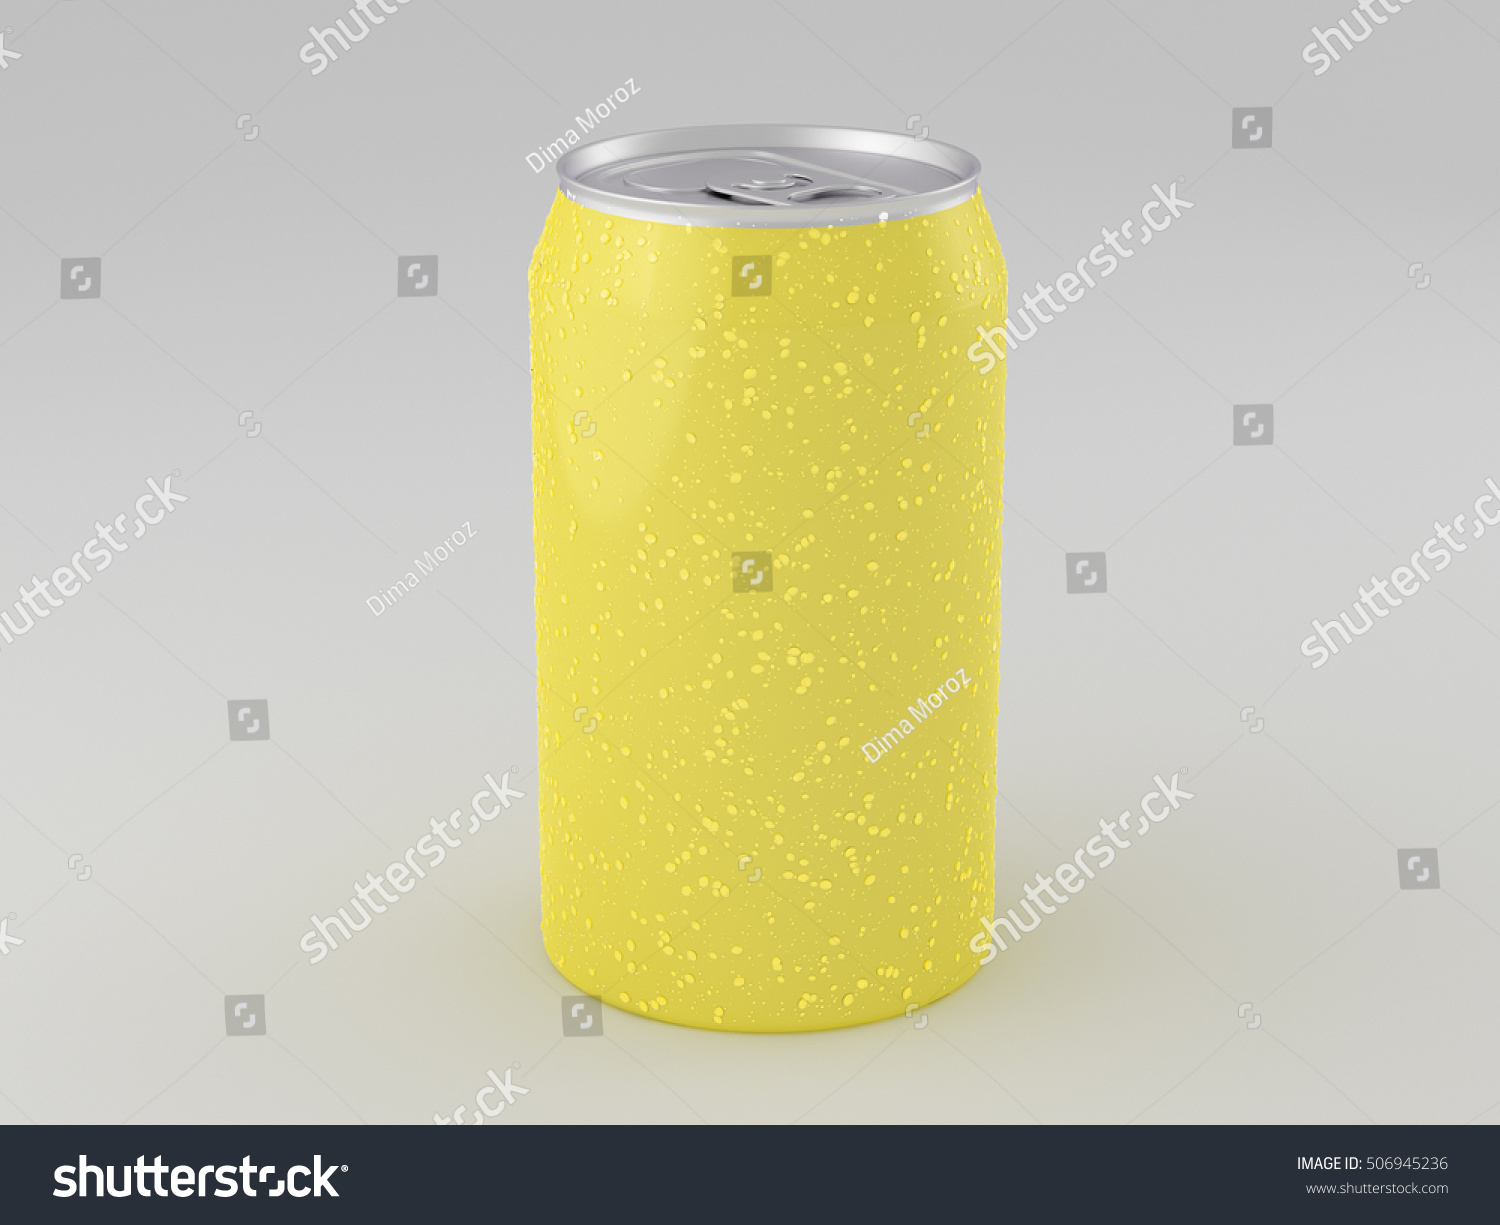 Download Yellow Aluminum Can Mockup Condensation Drops Stock Illustration 506945236 Yellowimages Mockups